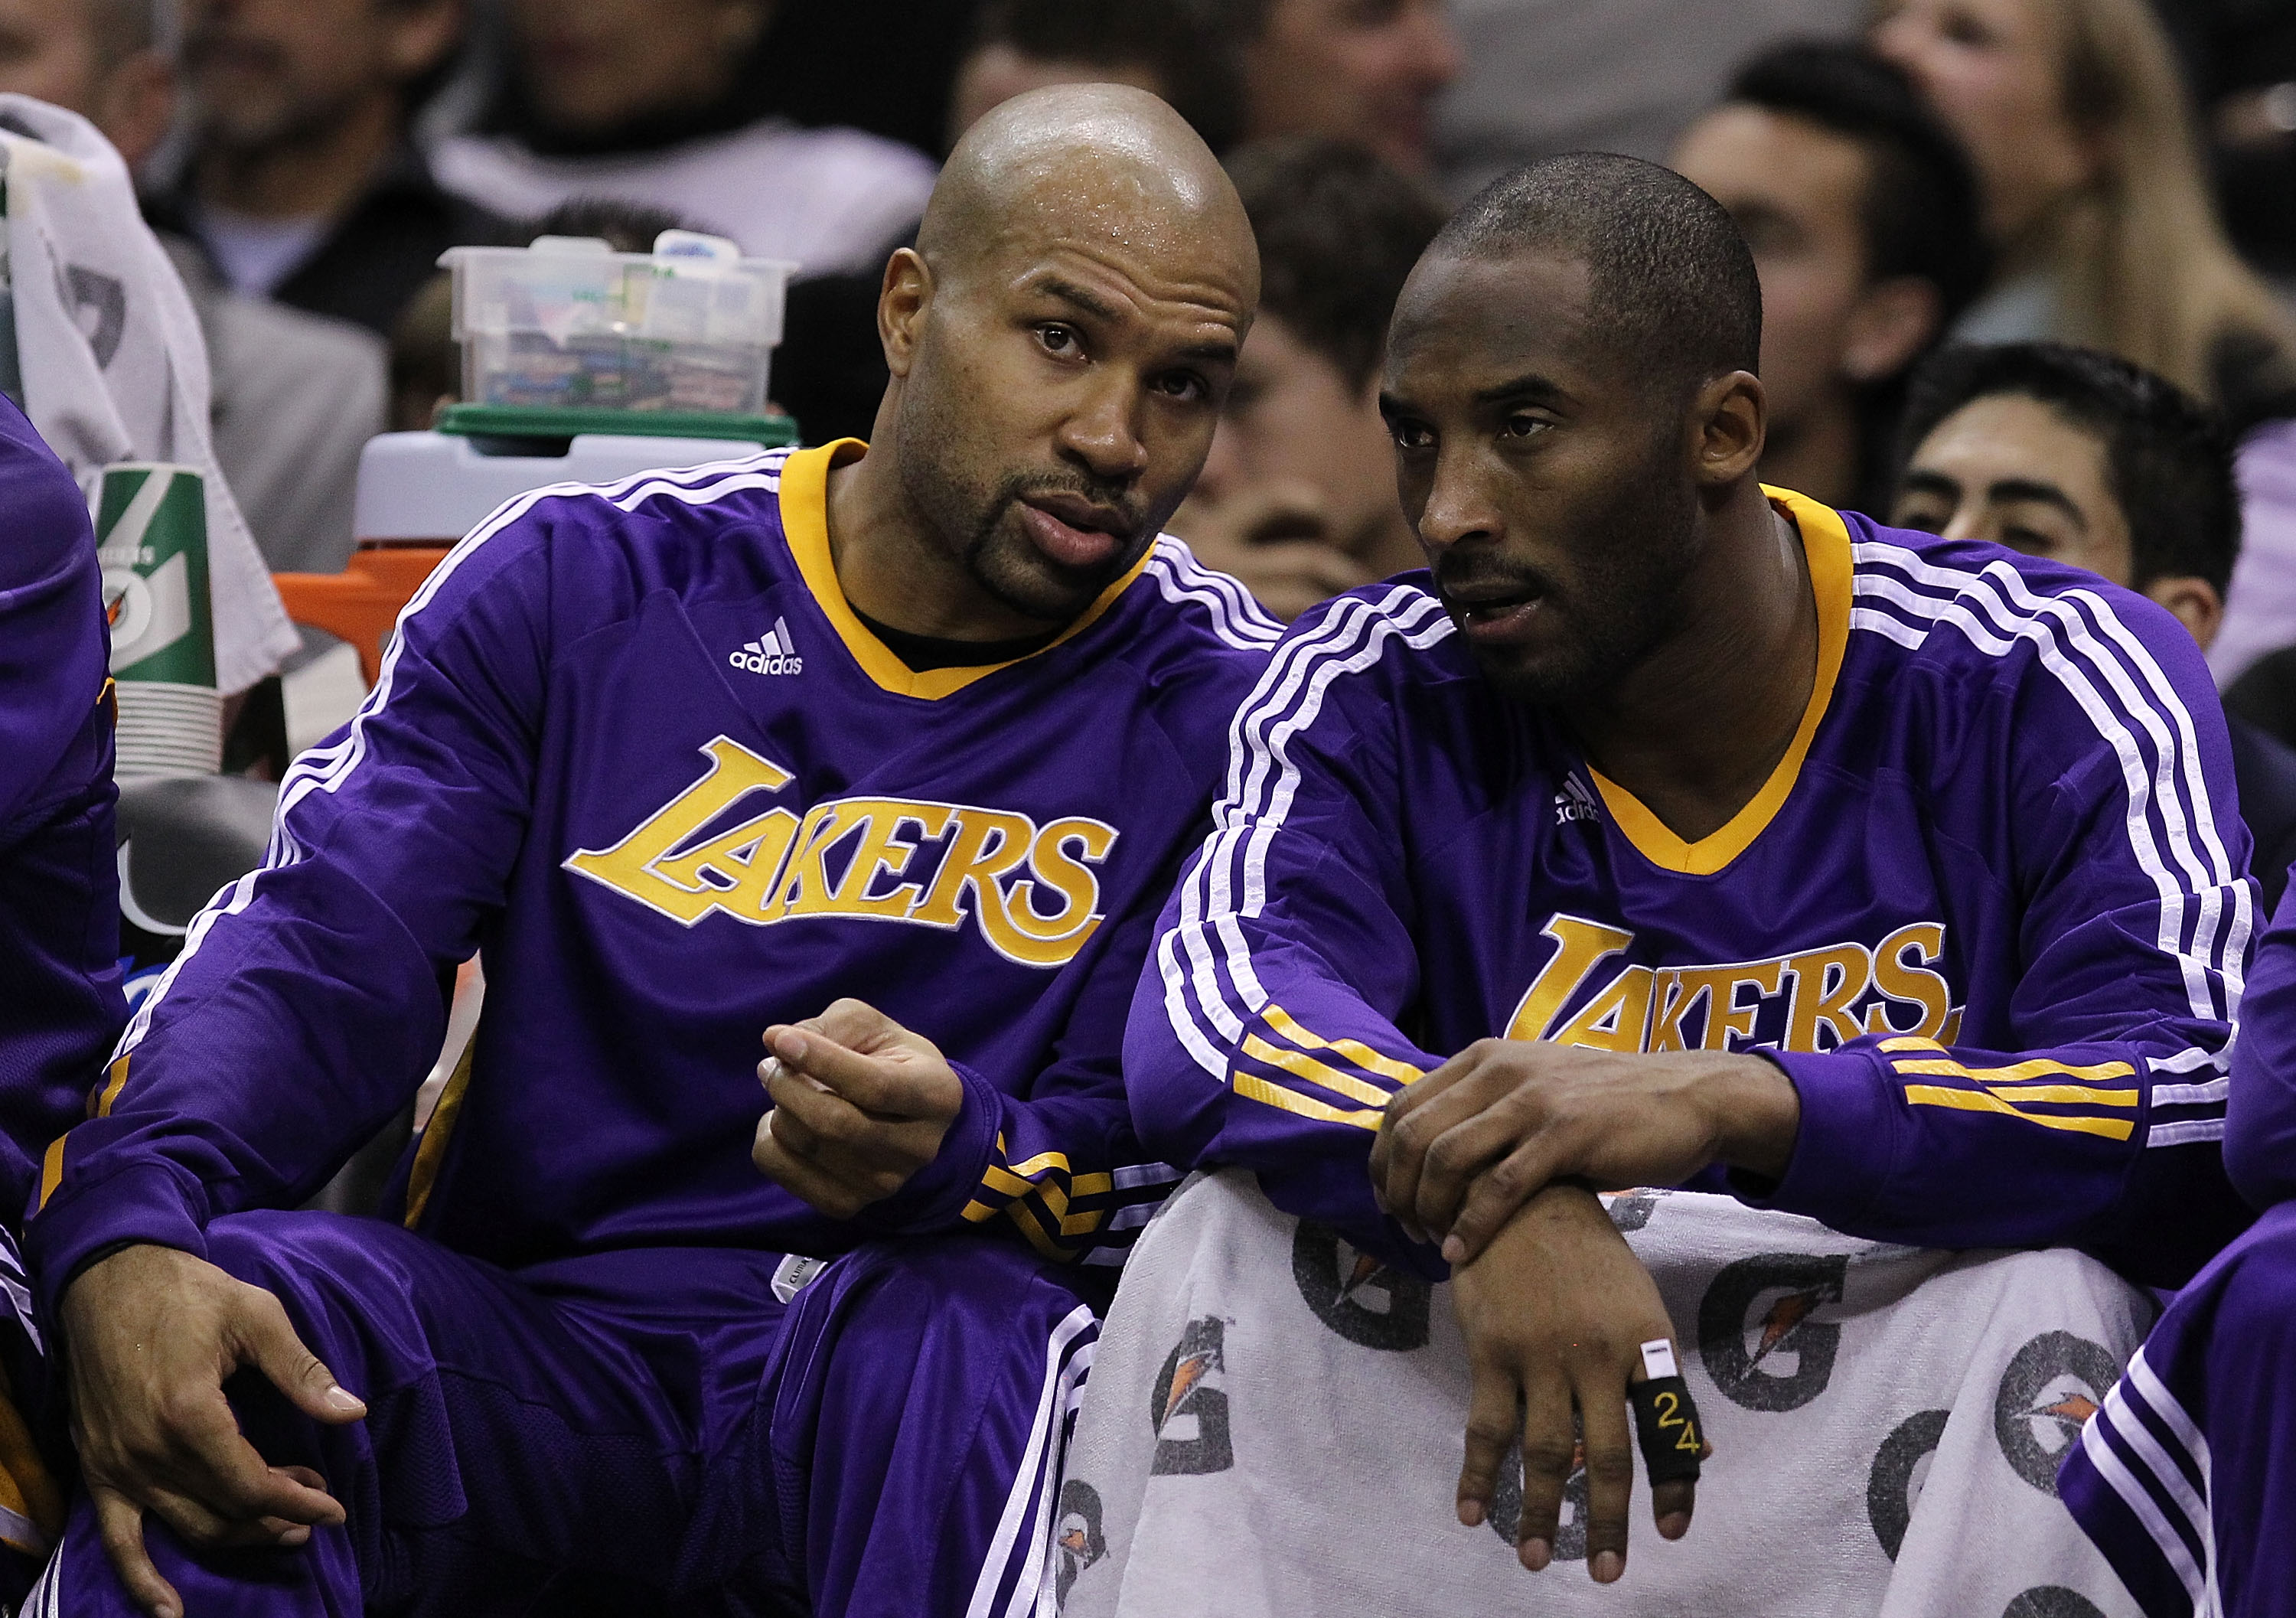 SAN ANTONIO, TX - DECEMBER 28:  Guard Derek Fisher #2 and Kobe Bryant #24 of the Los Angeles Lakers at AT&T Center on December 28, 2010 in San Antonio, Texas.  NOTE TO USER: User expressly acknowledges and agrees that, by downloading and/or using this pho